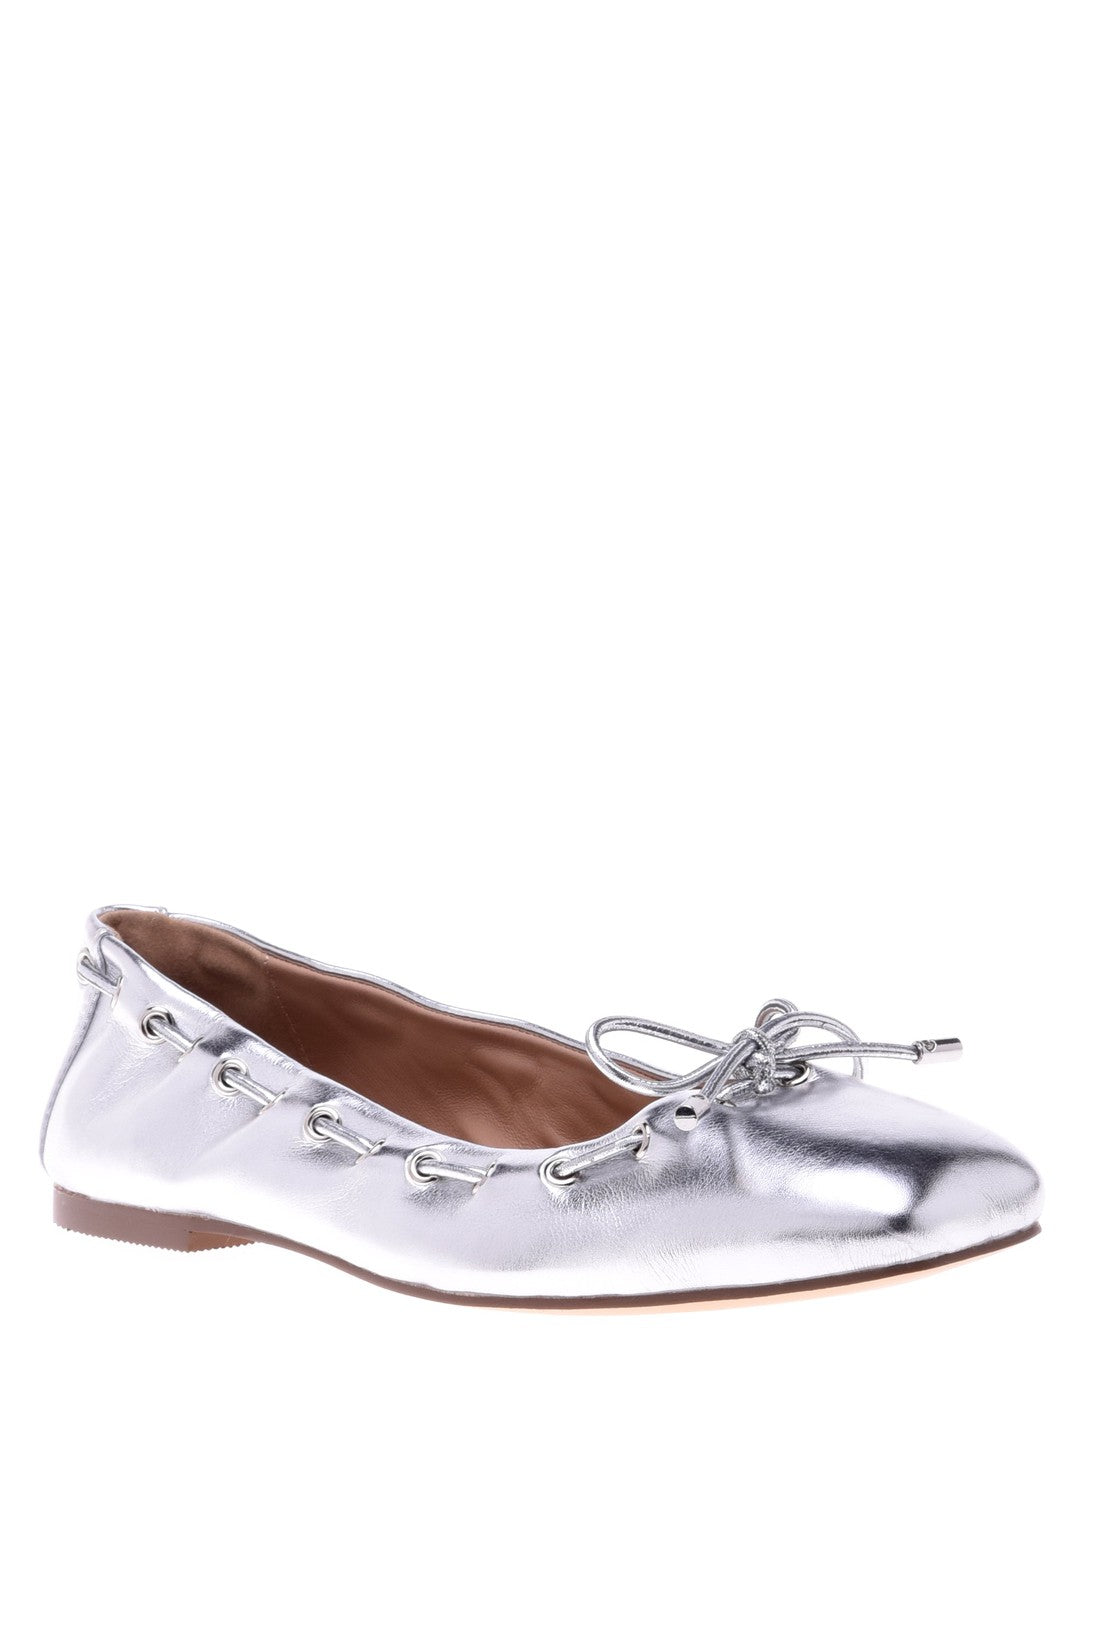 BALDININI-OUTLET-SALE-Ballerina-pump-in-silver-laminated-nappa-leather-Halbschuhe-35-ARCHIVE-COLLECTION.jpg